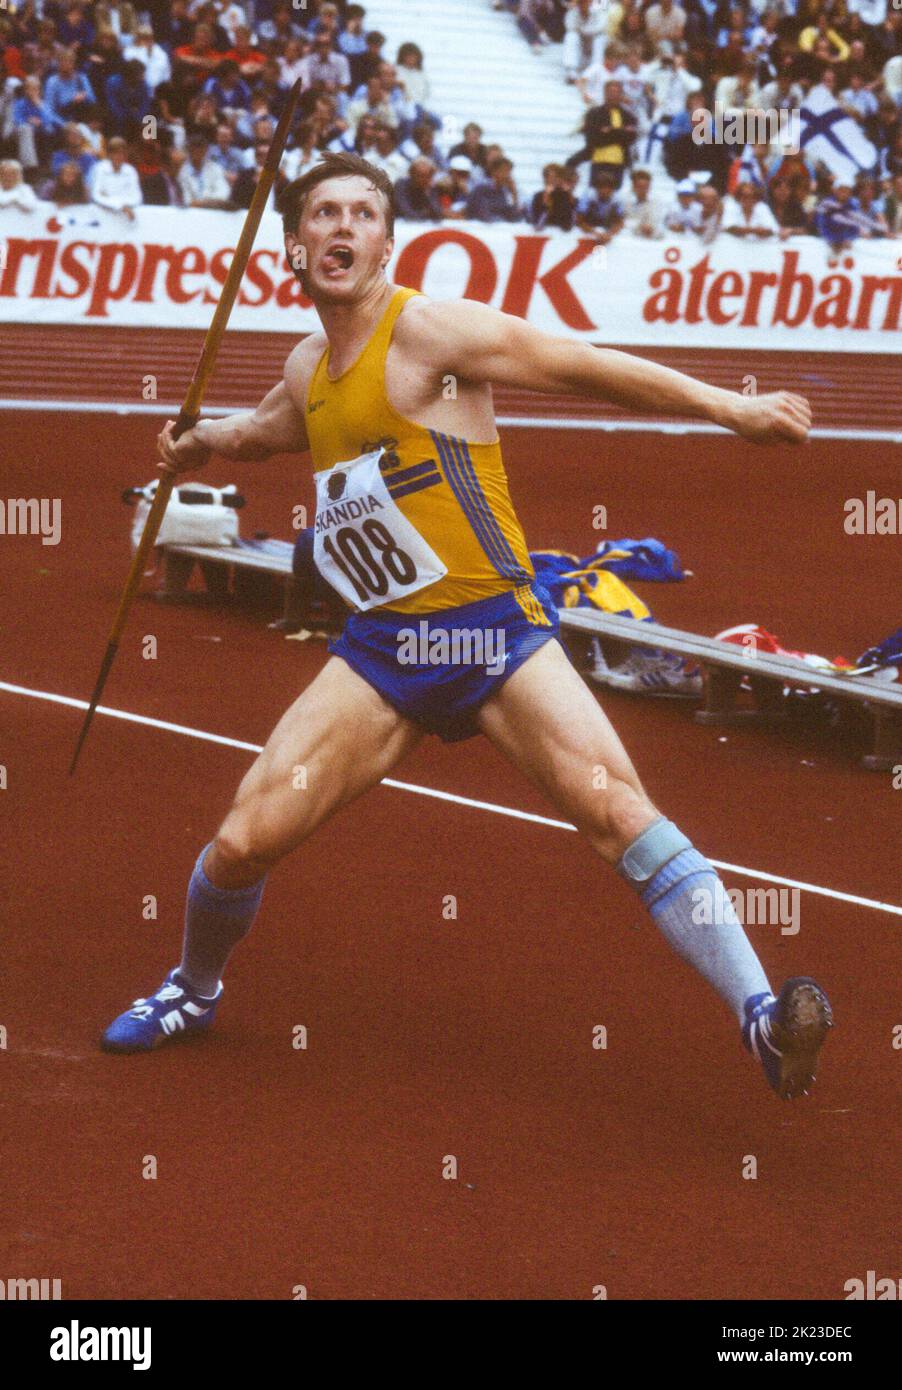 KENTH ELDEBRINK Swedish athlete in the mens javelin throw eventhe won a bronze medal in 1984 summer olympics in Los Angeles Stock Photo